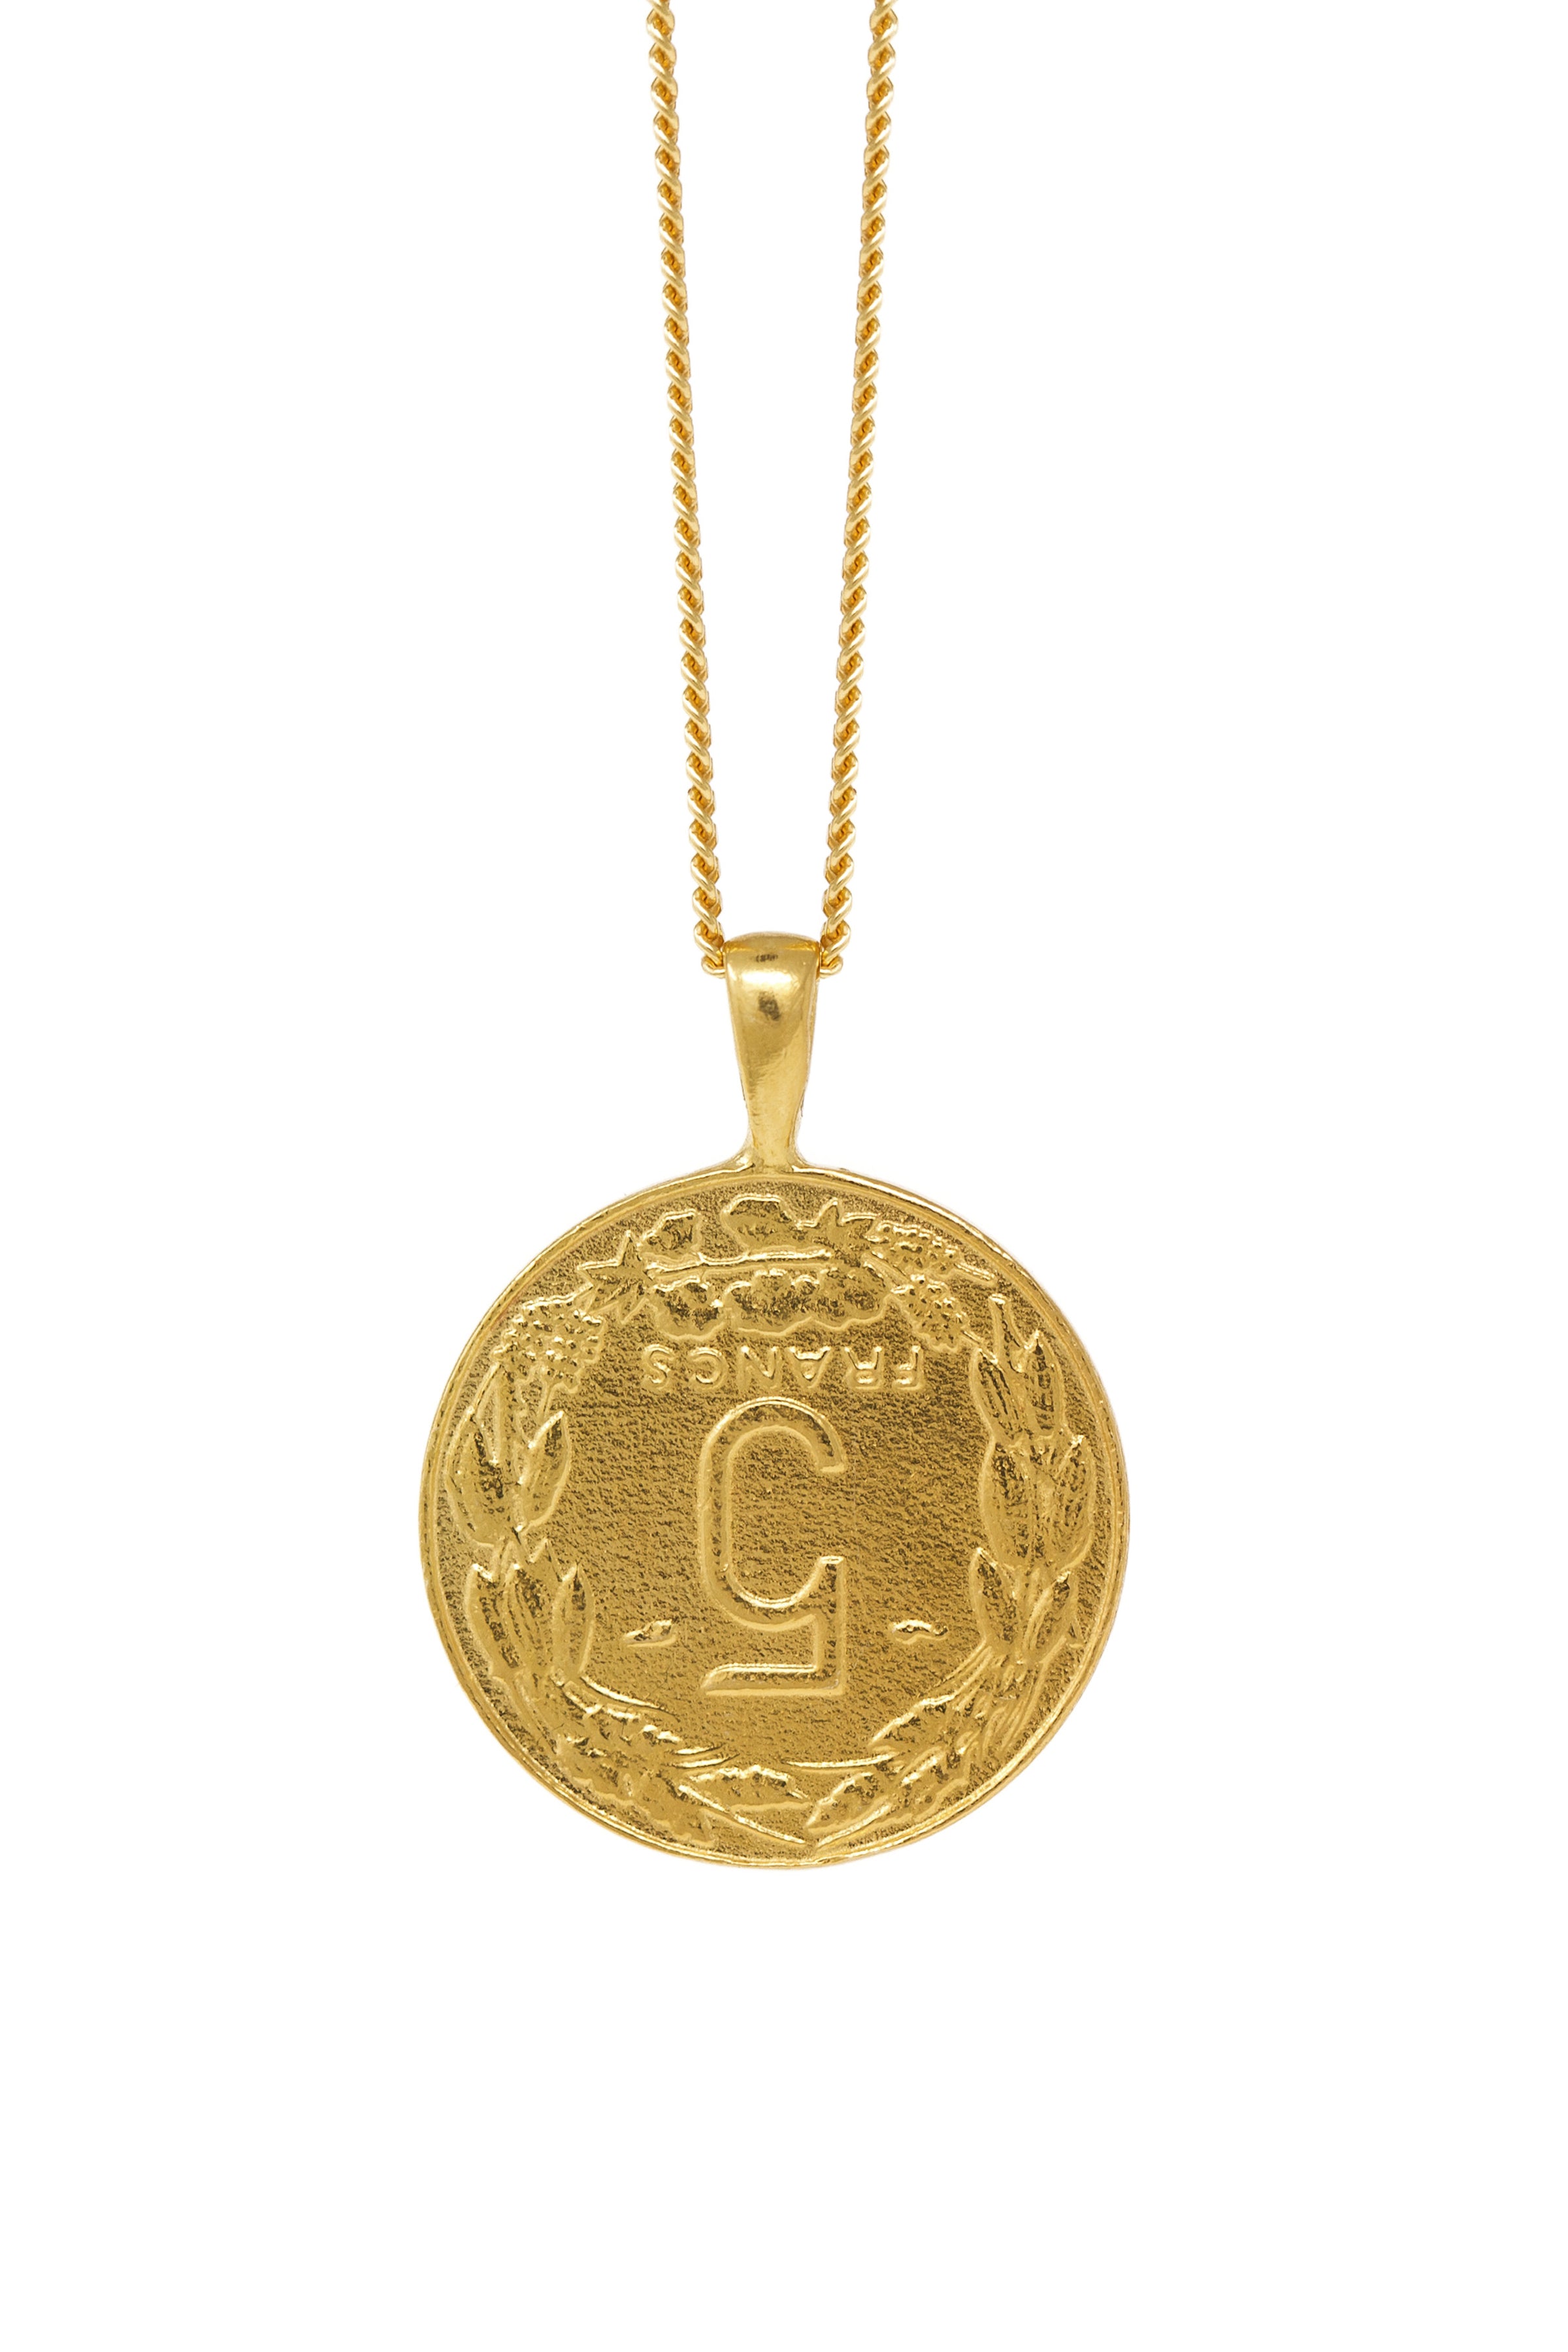 THE CAMEROON Coin Necklace